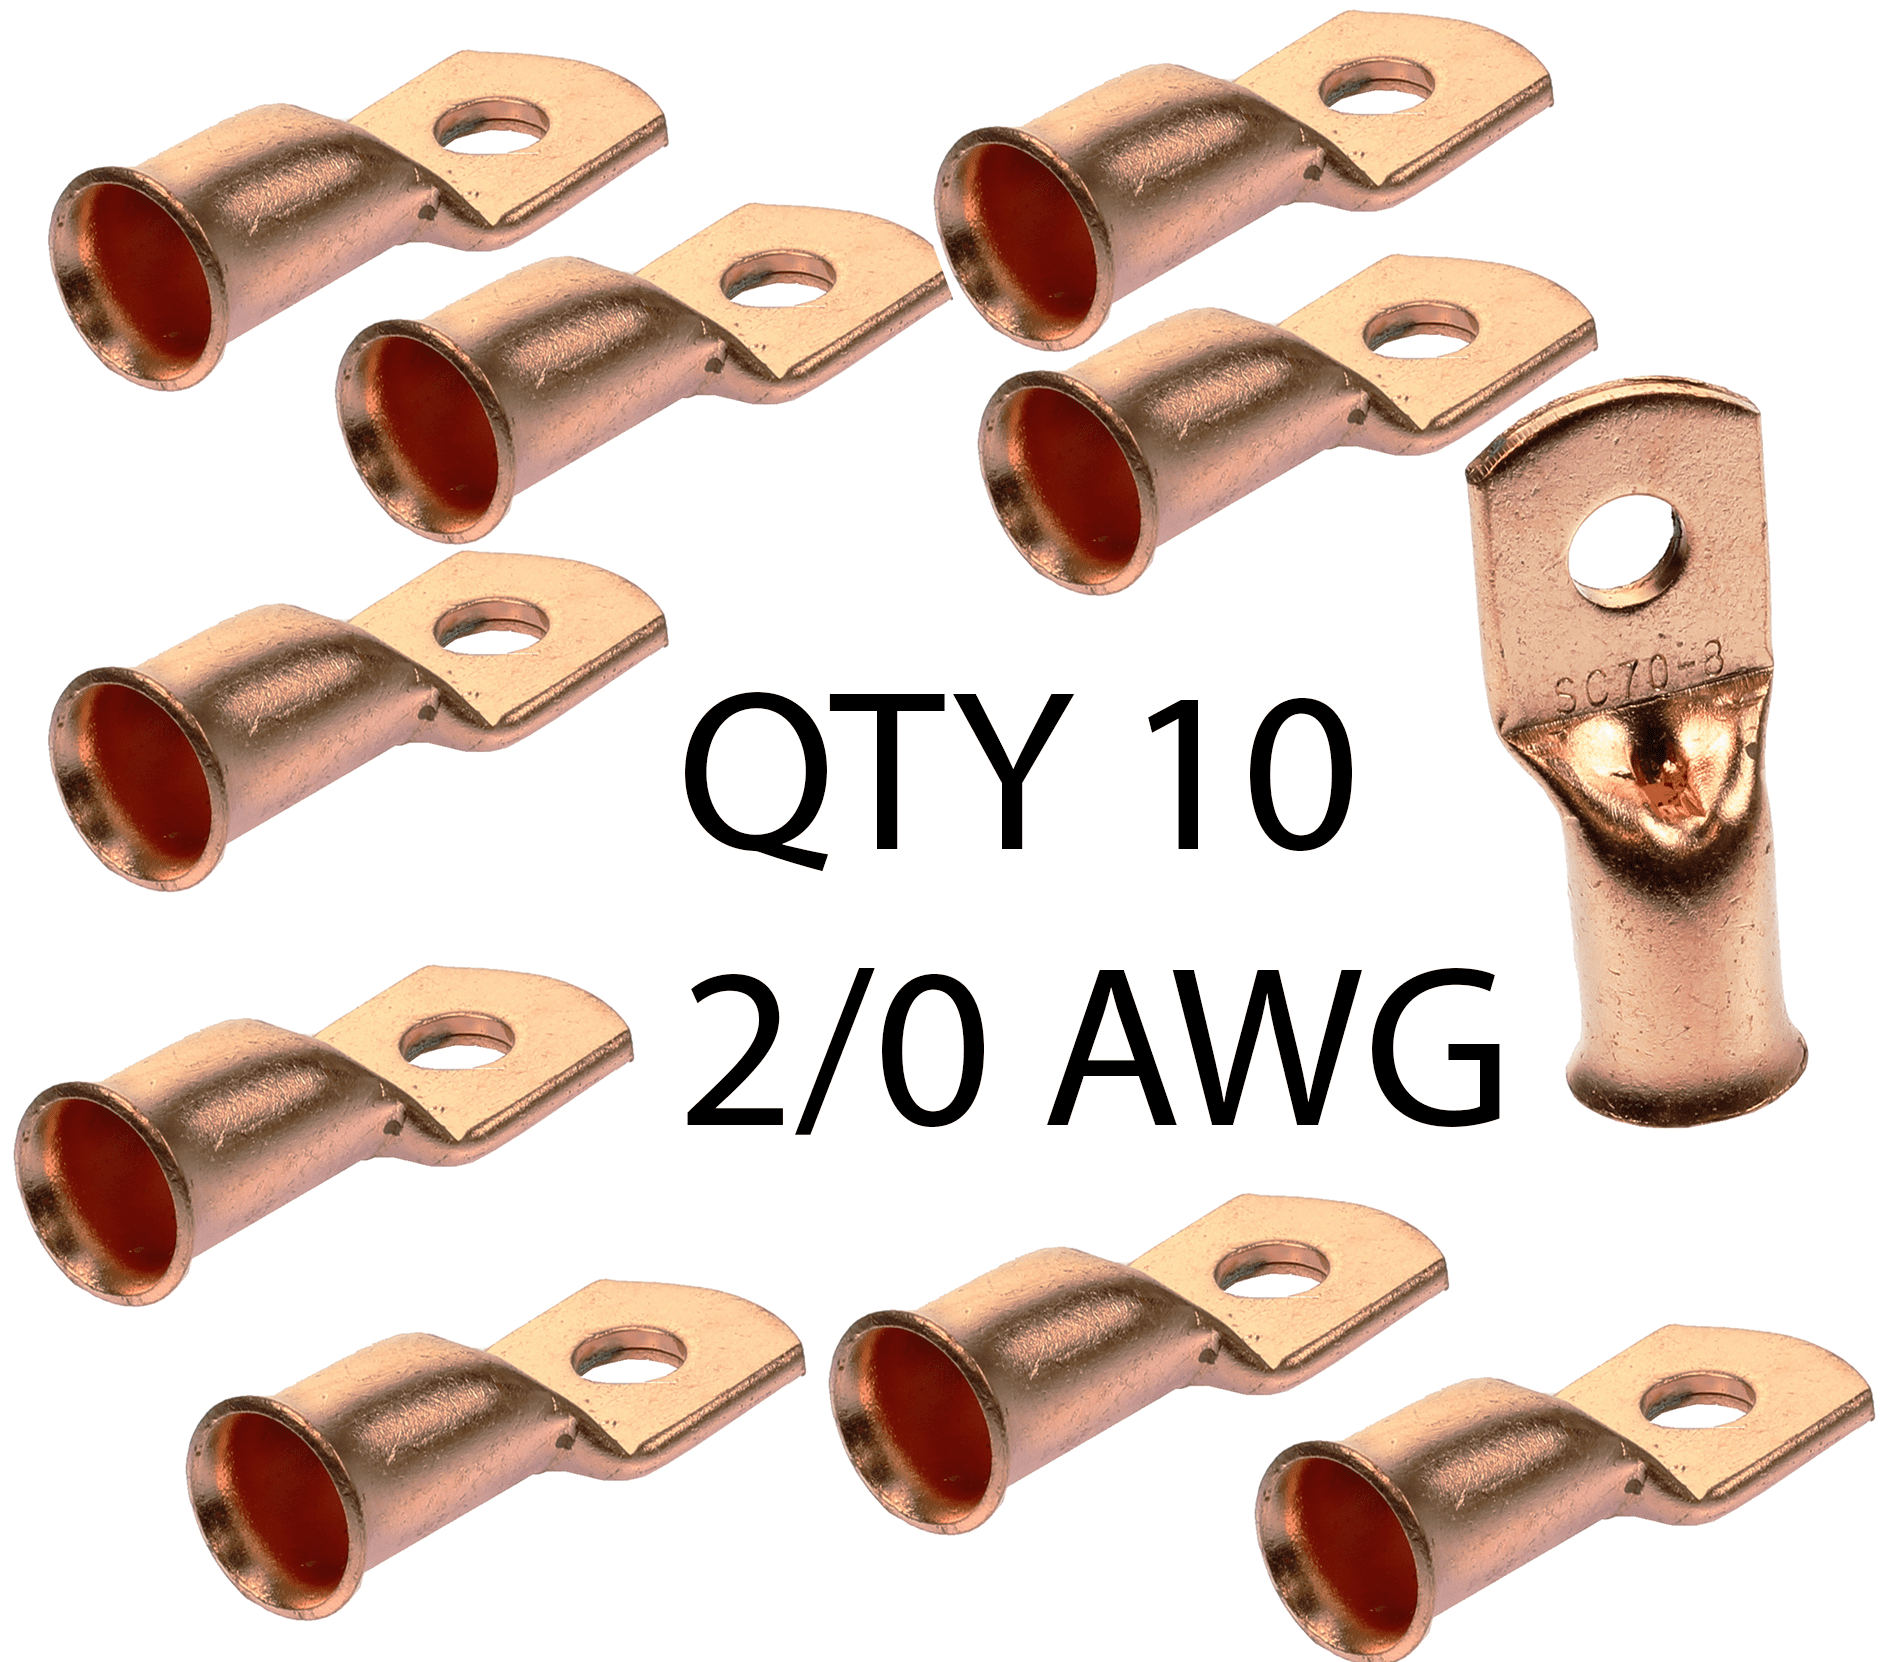 6 2/0 AWG gauge 5/16" non-insulated Tinned Copper Crimp Ring Terminal Lug QTY 